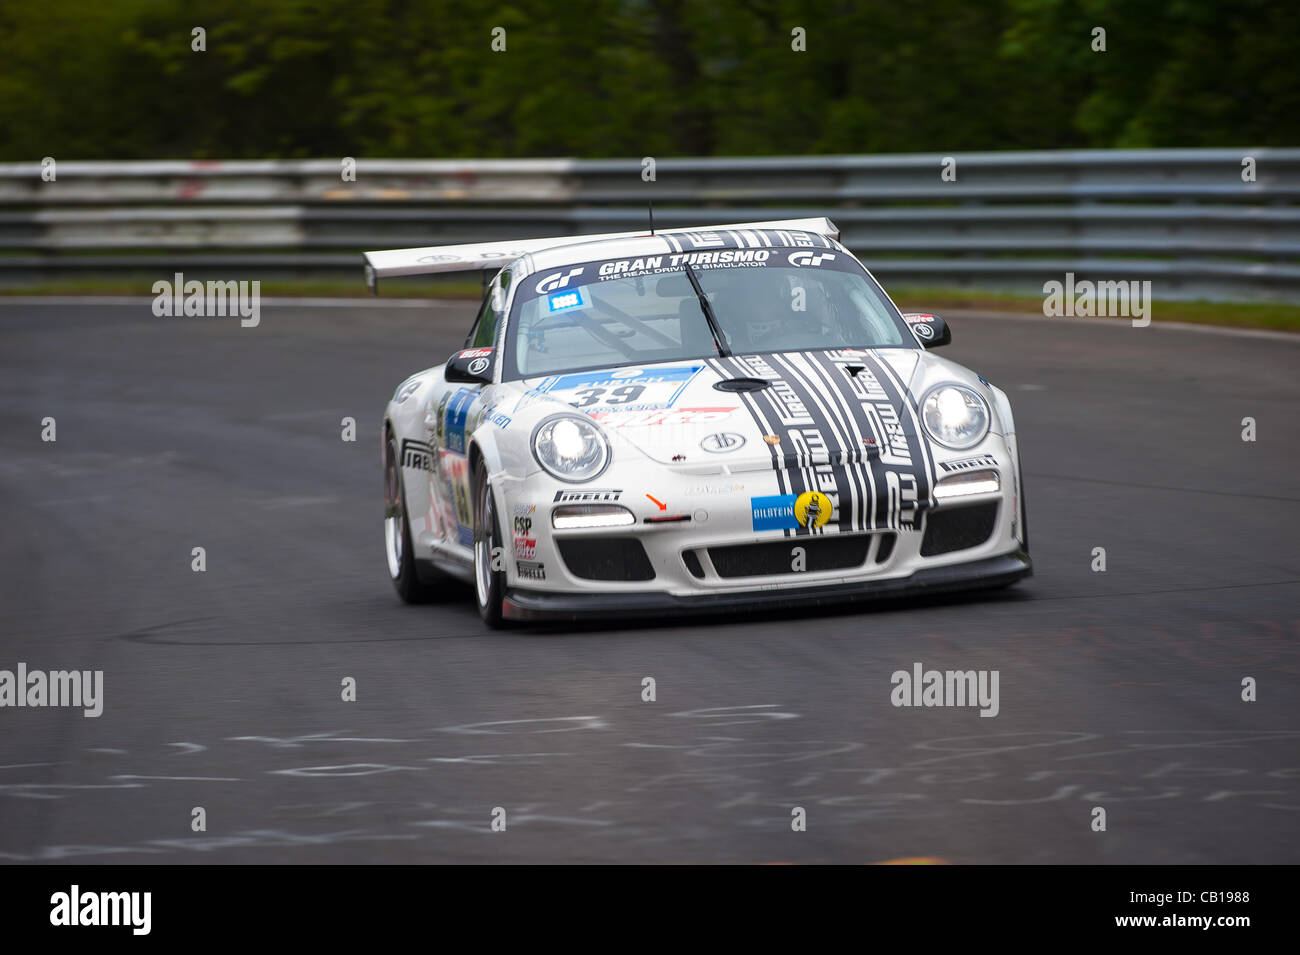 Christian Gebhardt (GER) / Markus Grossmann (GER) / Timo Kluck (GER) driving the #33 SP7 Dorr Motorsport Porsche 911 GT3 Cup during final top 40 qualifying for the Nurburgring 24 hour race near Nurburg, Germany on May 18, 2012. Photo: Matt Jacques Stock Photo